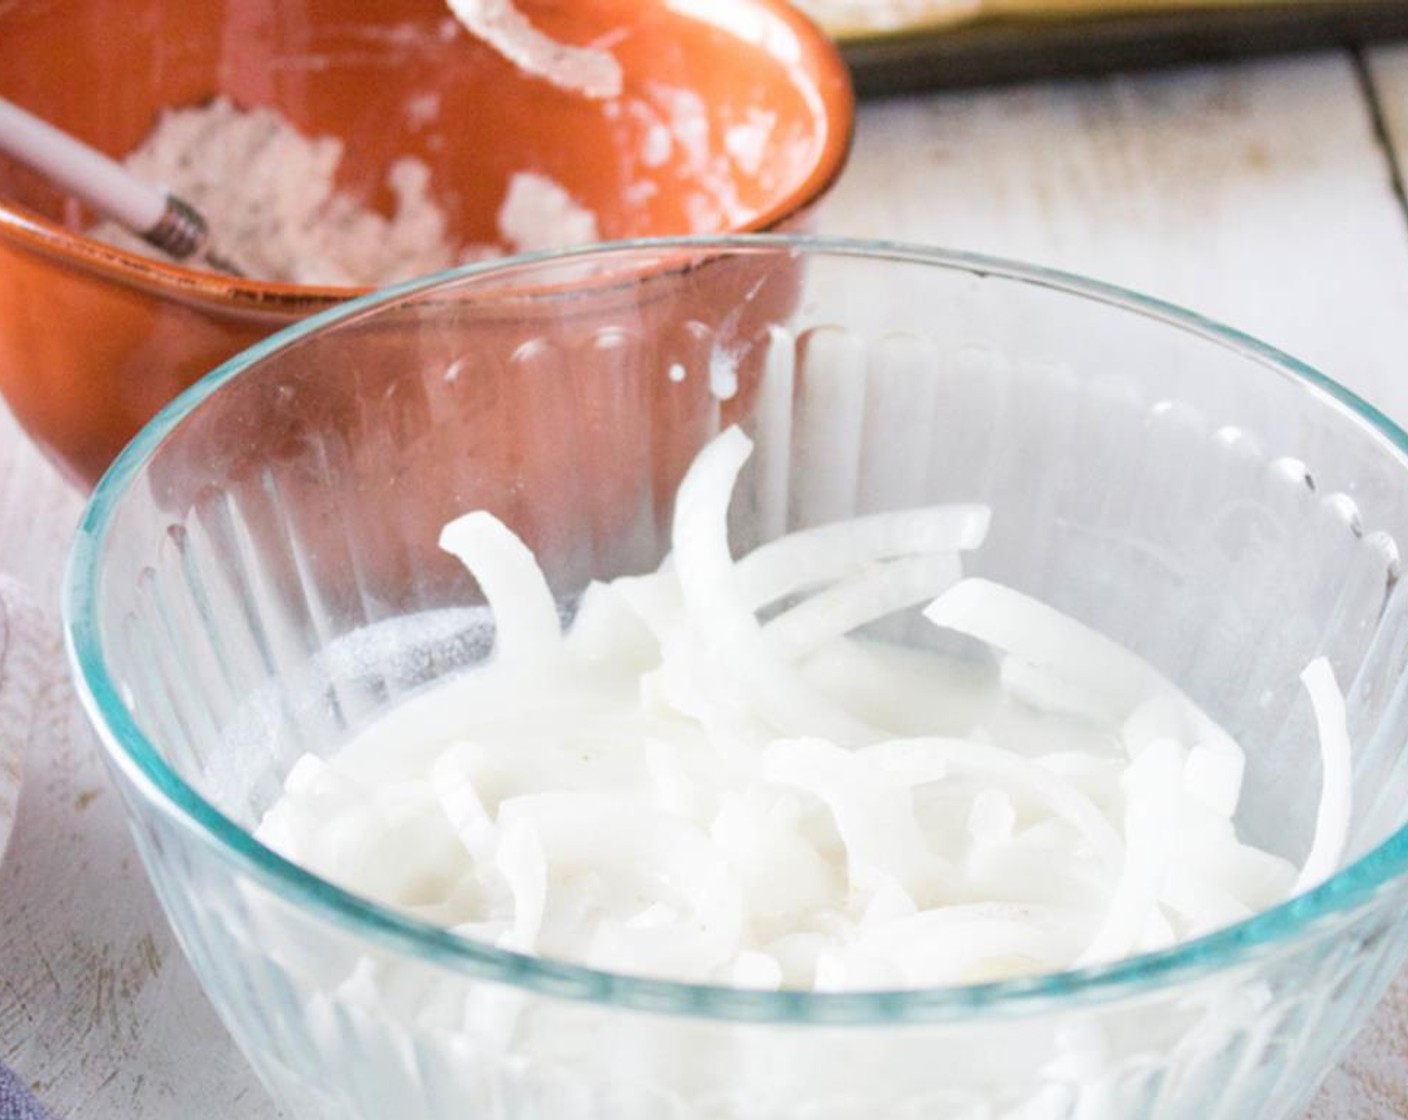 step 4 Remove onions from milk, dip into dry mixture and cover completely.